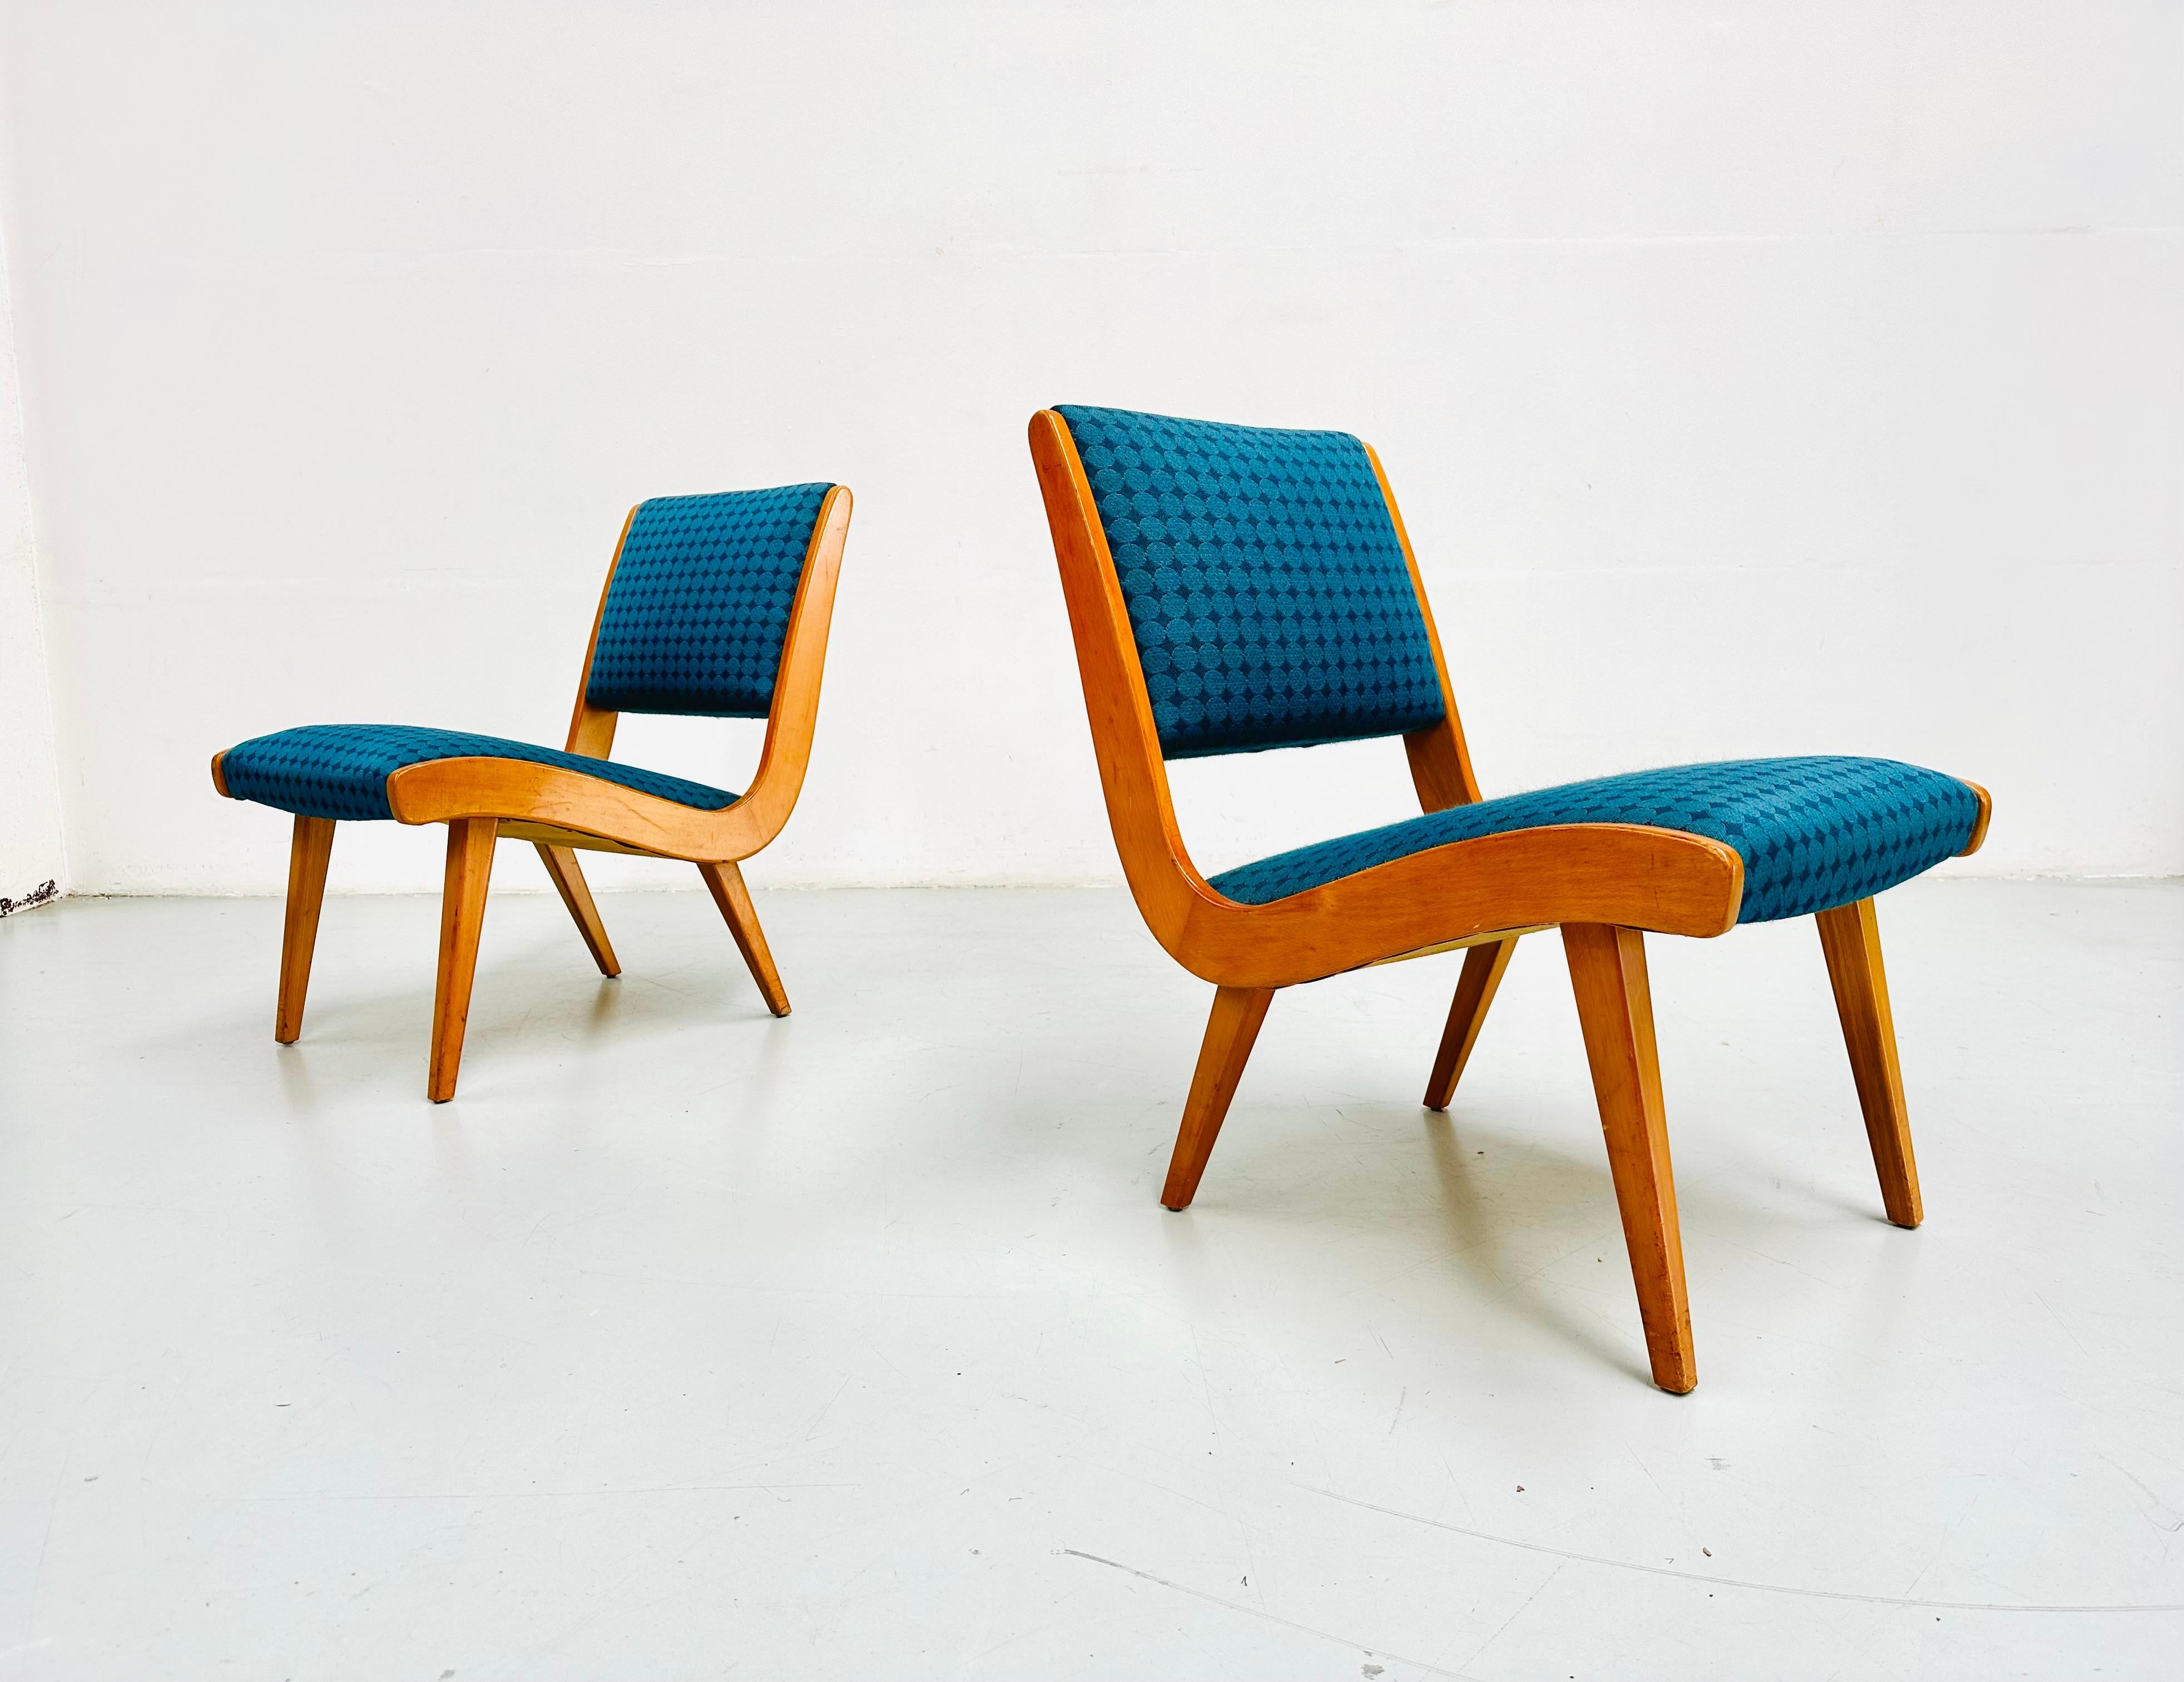 Milieu du XXe siècle 1950s Rare Set Vostra Chairs Numbered & Original Fabric by Jens Risom for Knoll. en vente